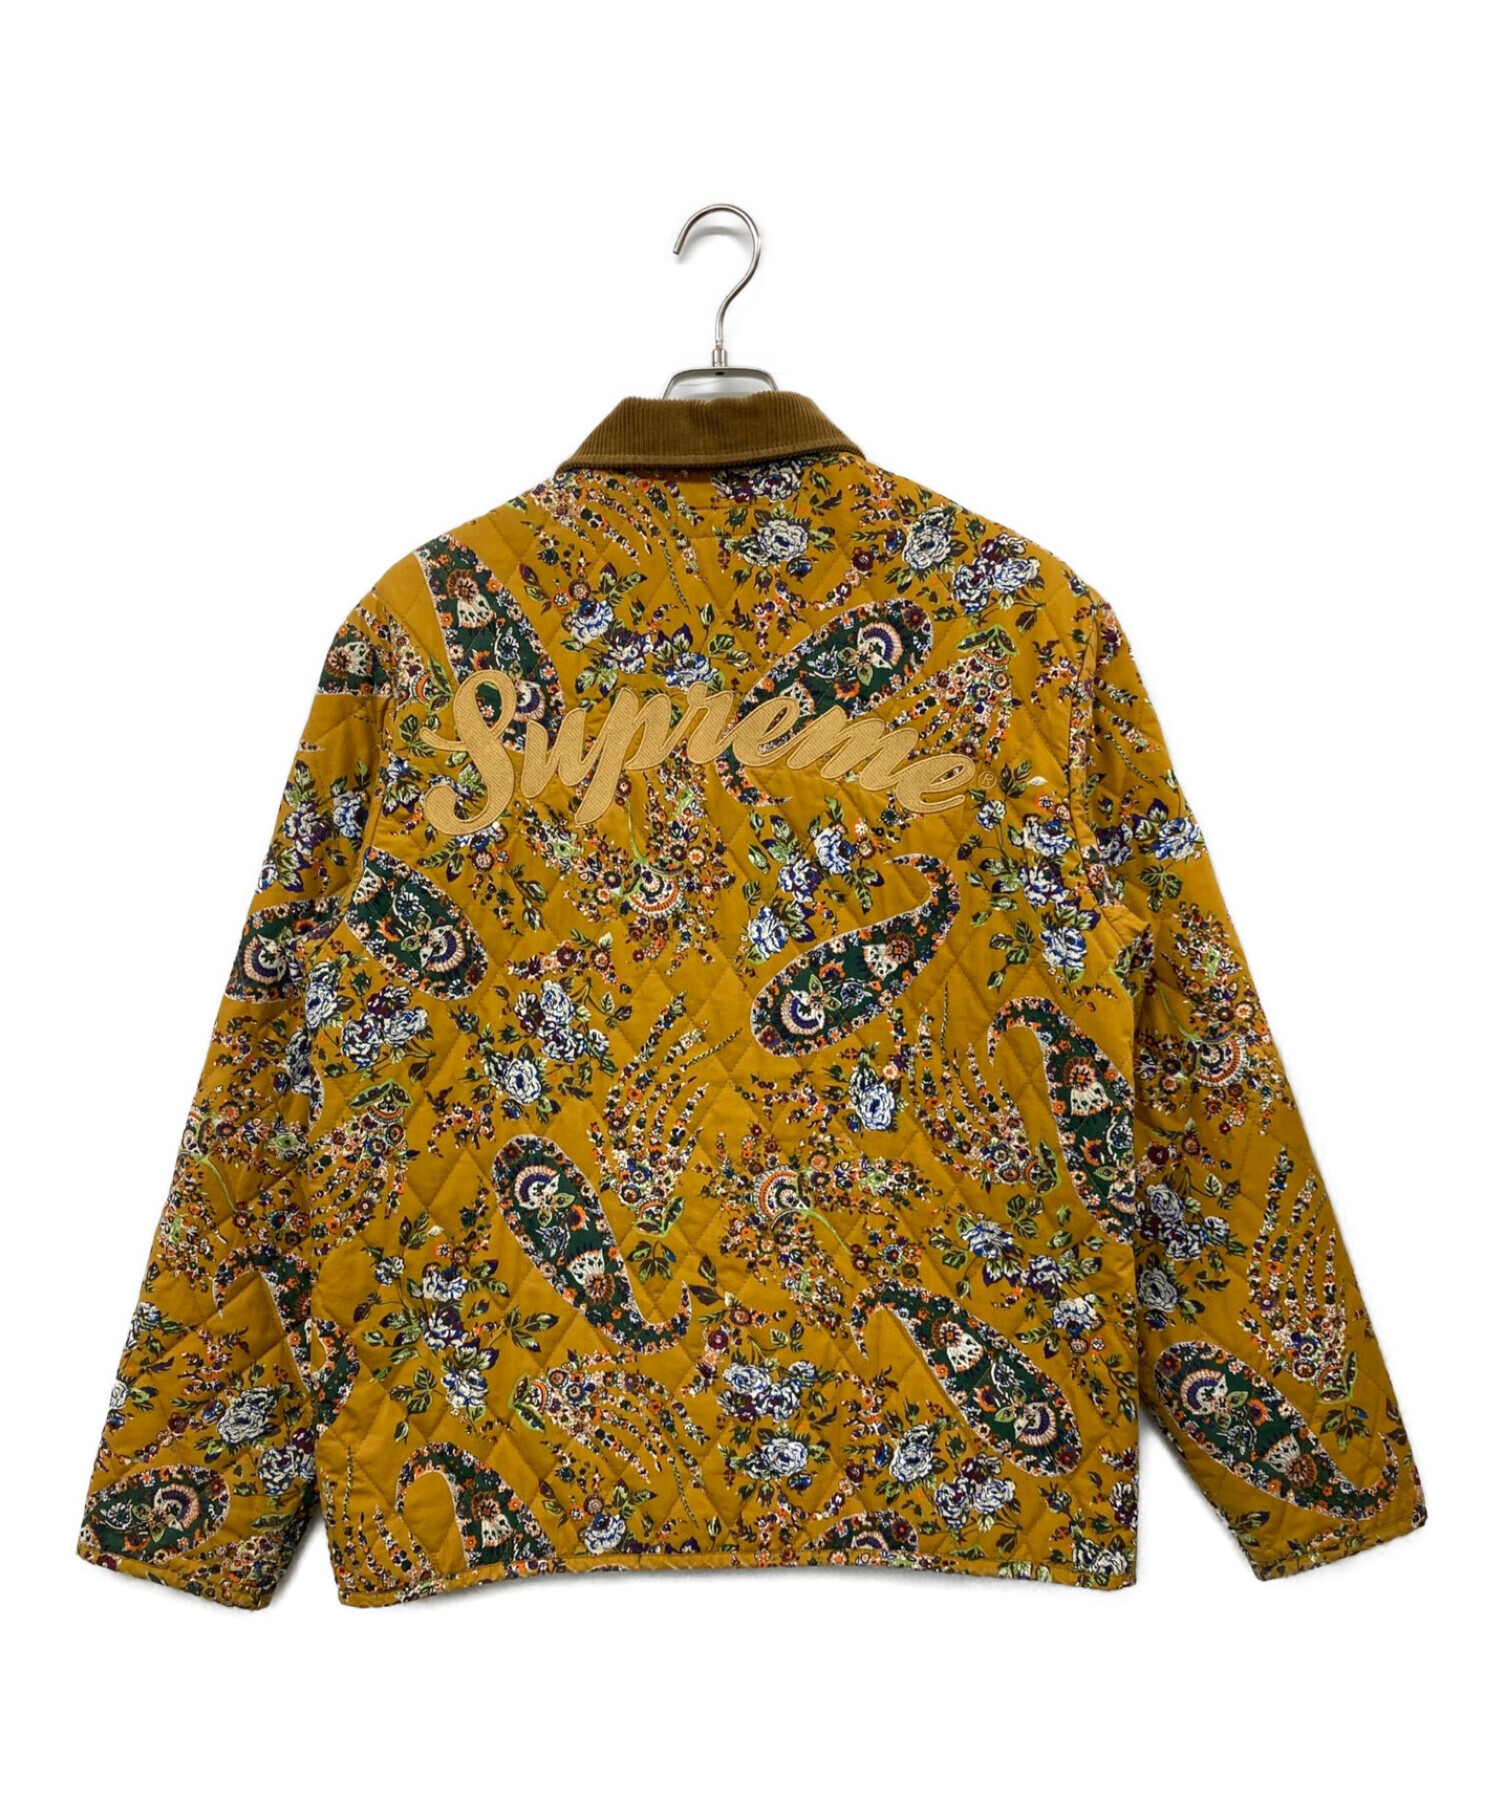 S supreme Quilted Paisley Jacket yellow - www.hondaprokevin.com